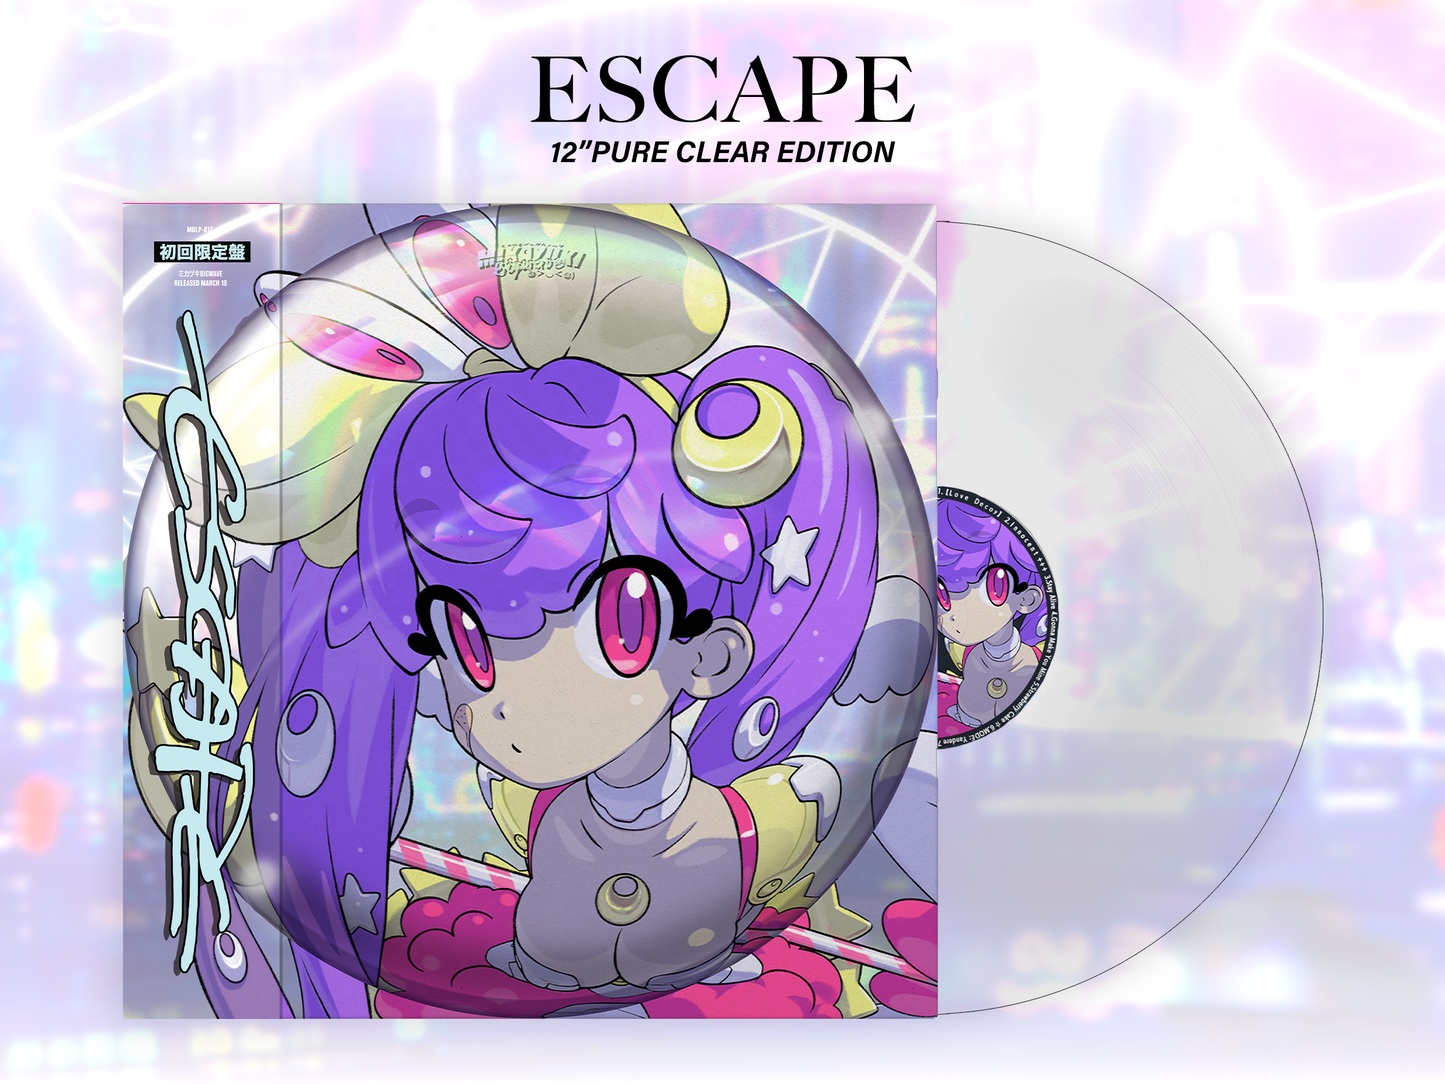 ESCAPE Limited Edition 12" PURE CLEAR Vinyl